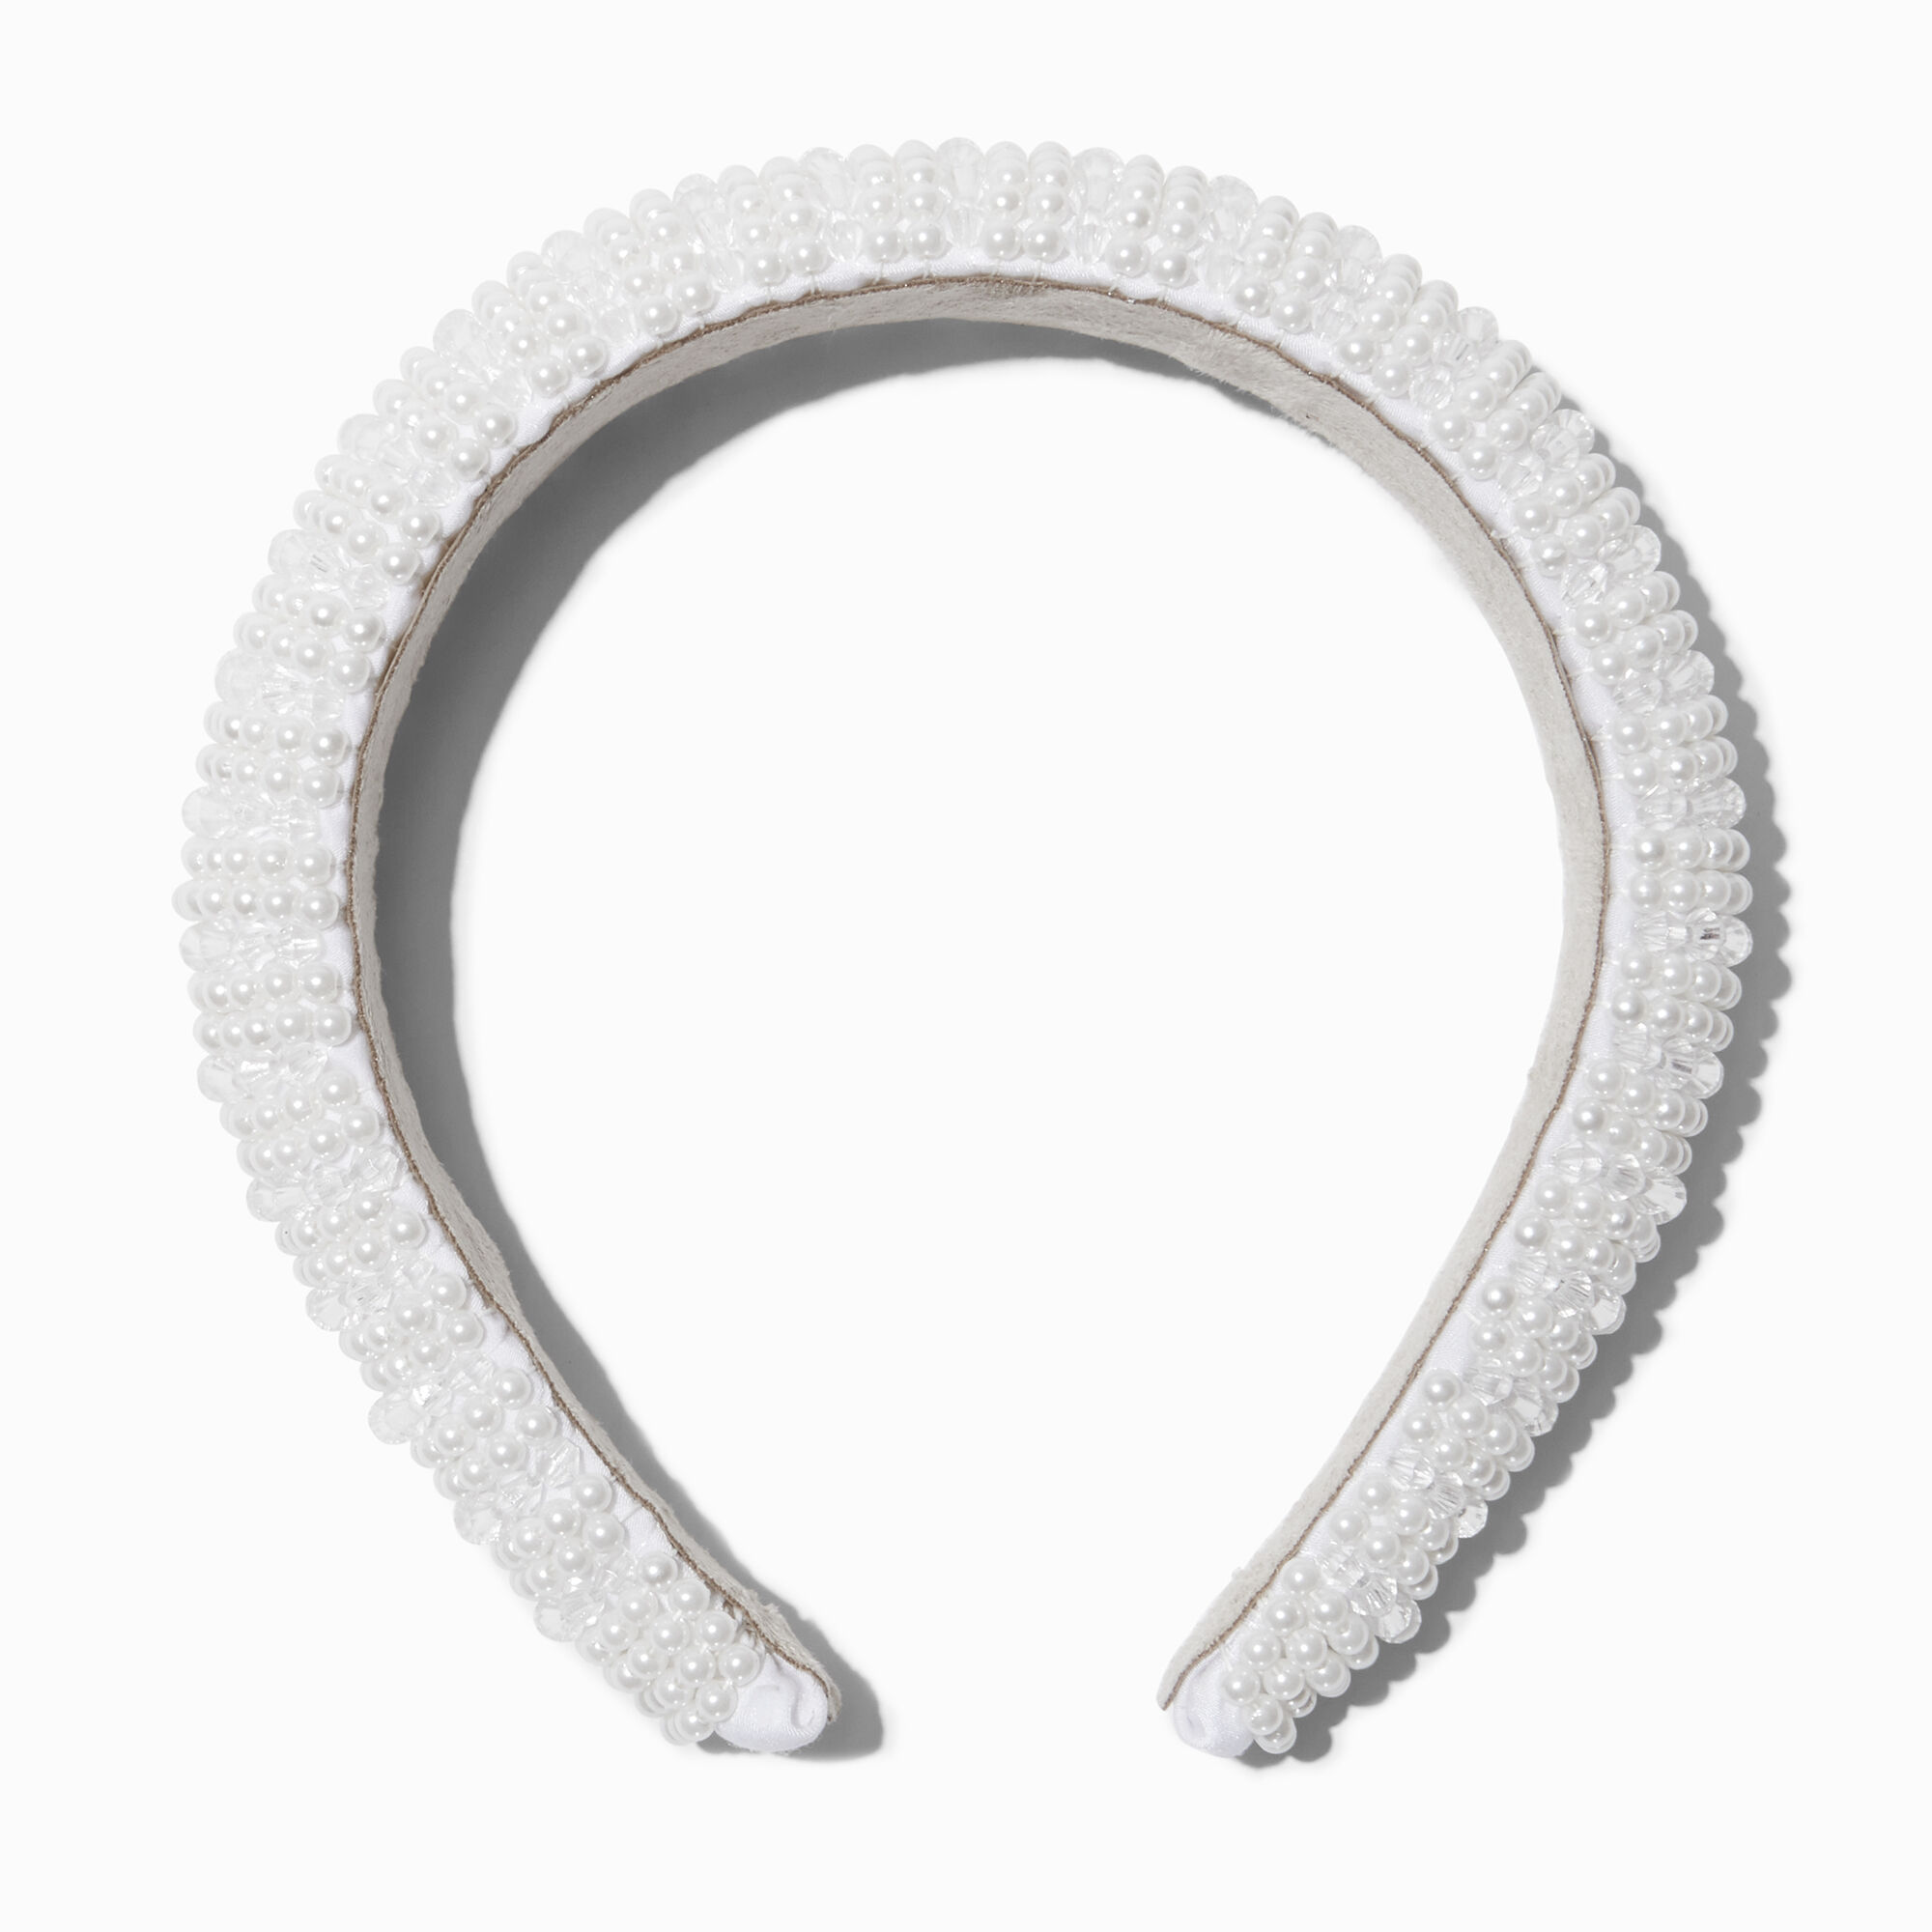 View Claires Pearl Crystal Puffy Headband White information